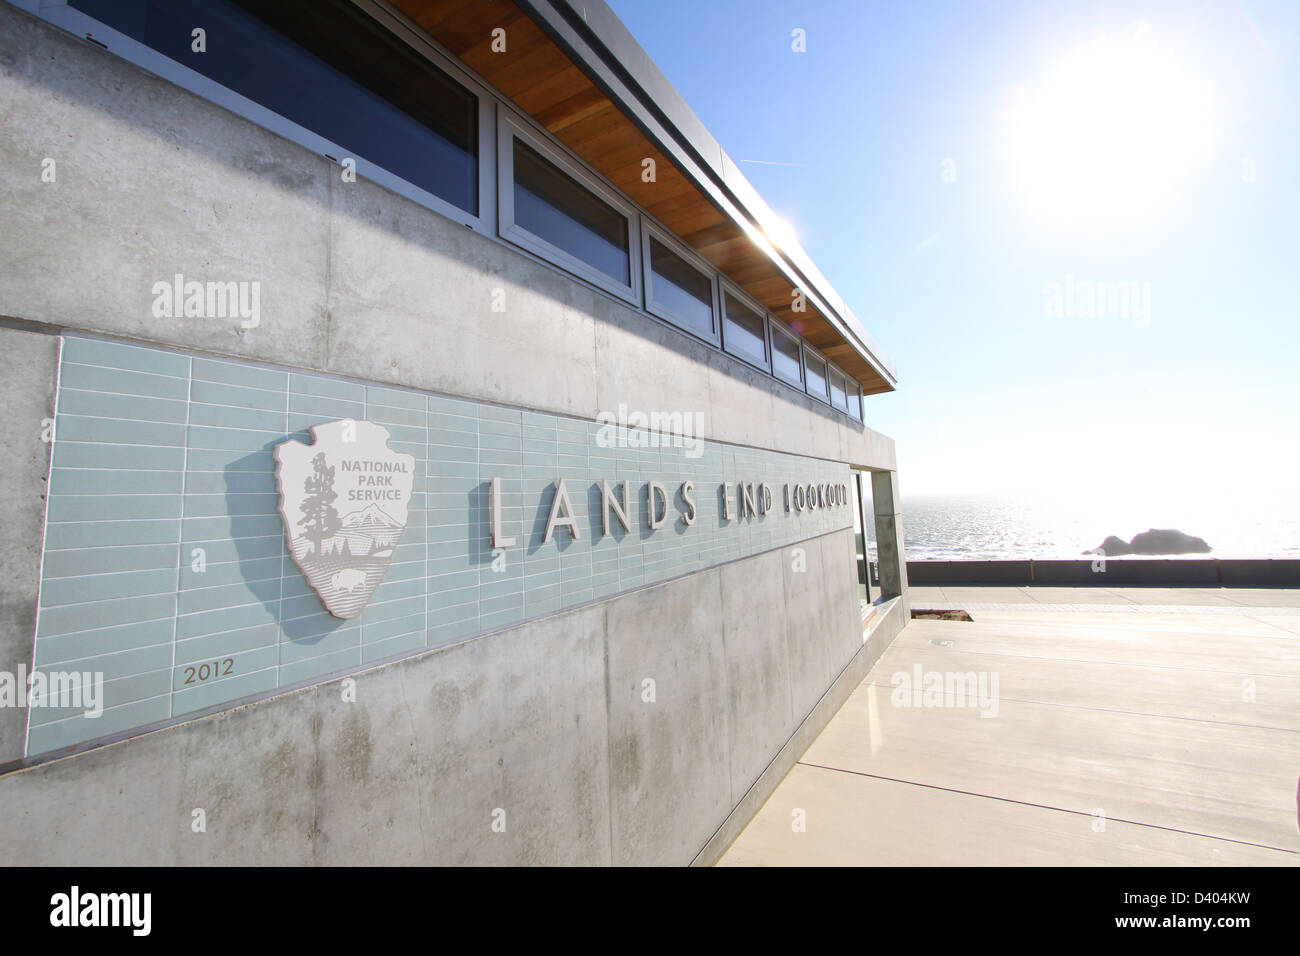 The newly built Land's End visitor center in San Francisco Stock Photo